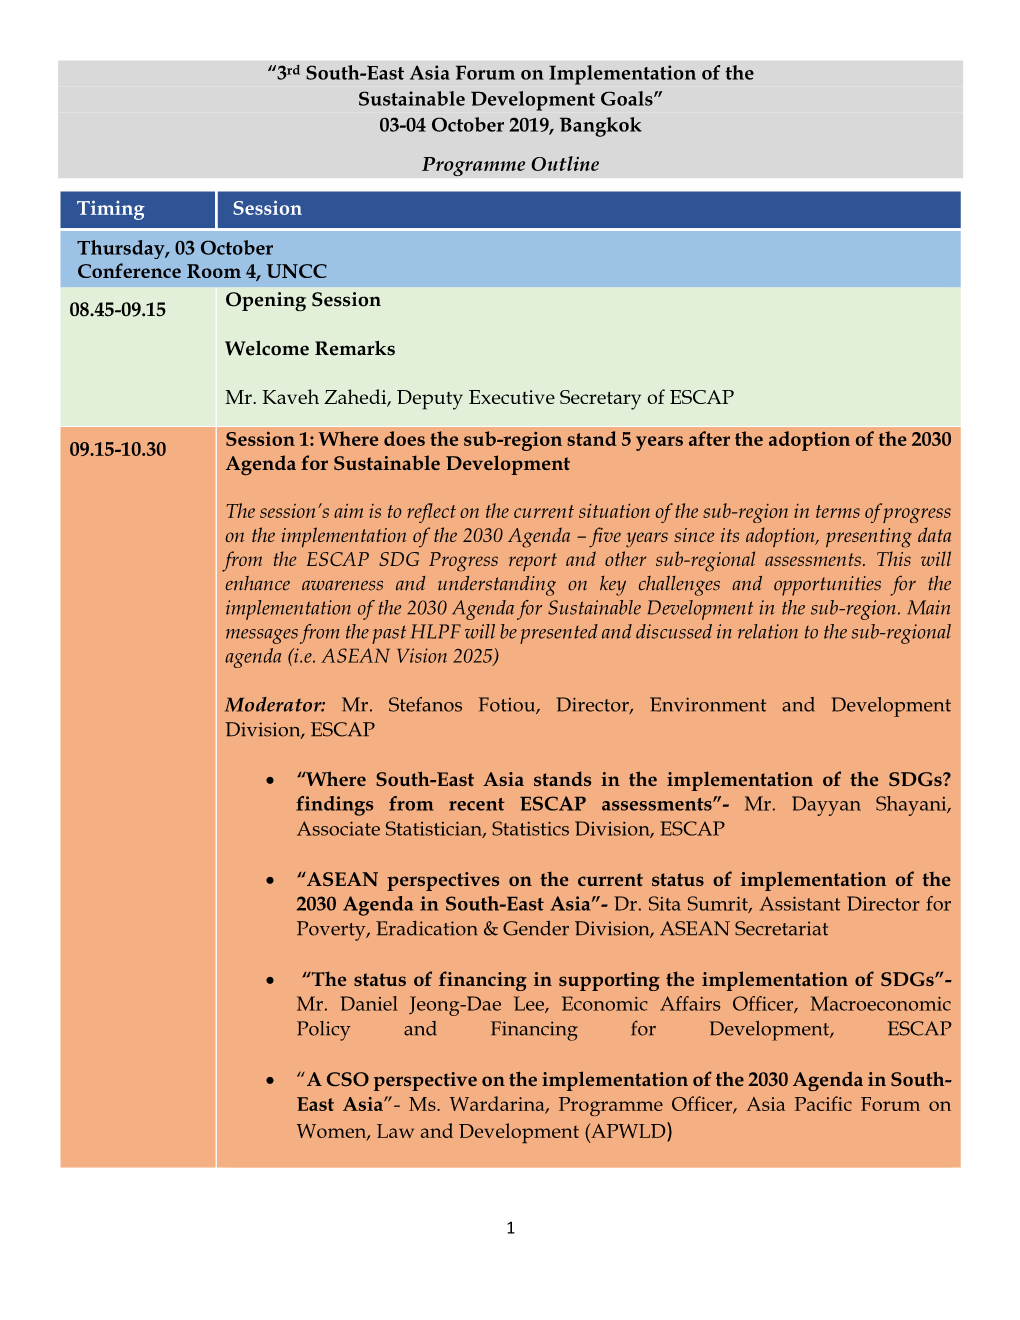 3Rd South-East Asia Forum on Implementation of the Sustainable Development Goals” 03-04 October 2019, Bangkok Programme Outline